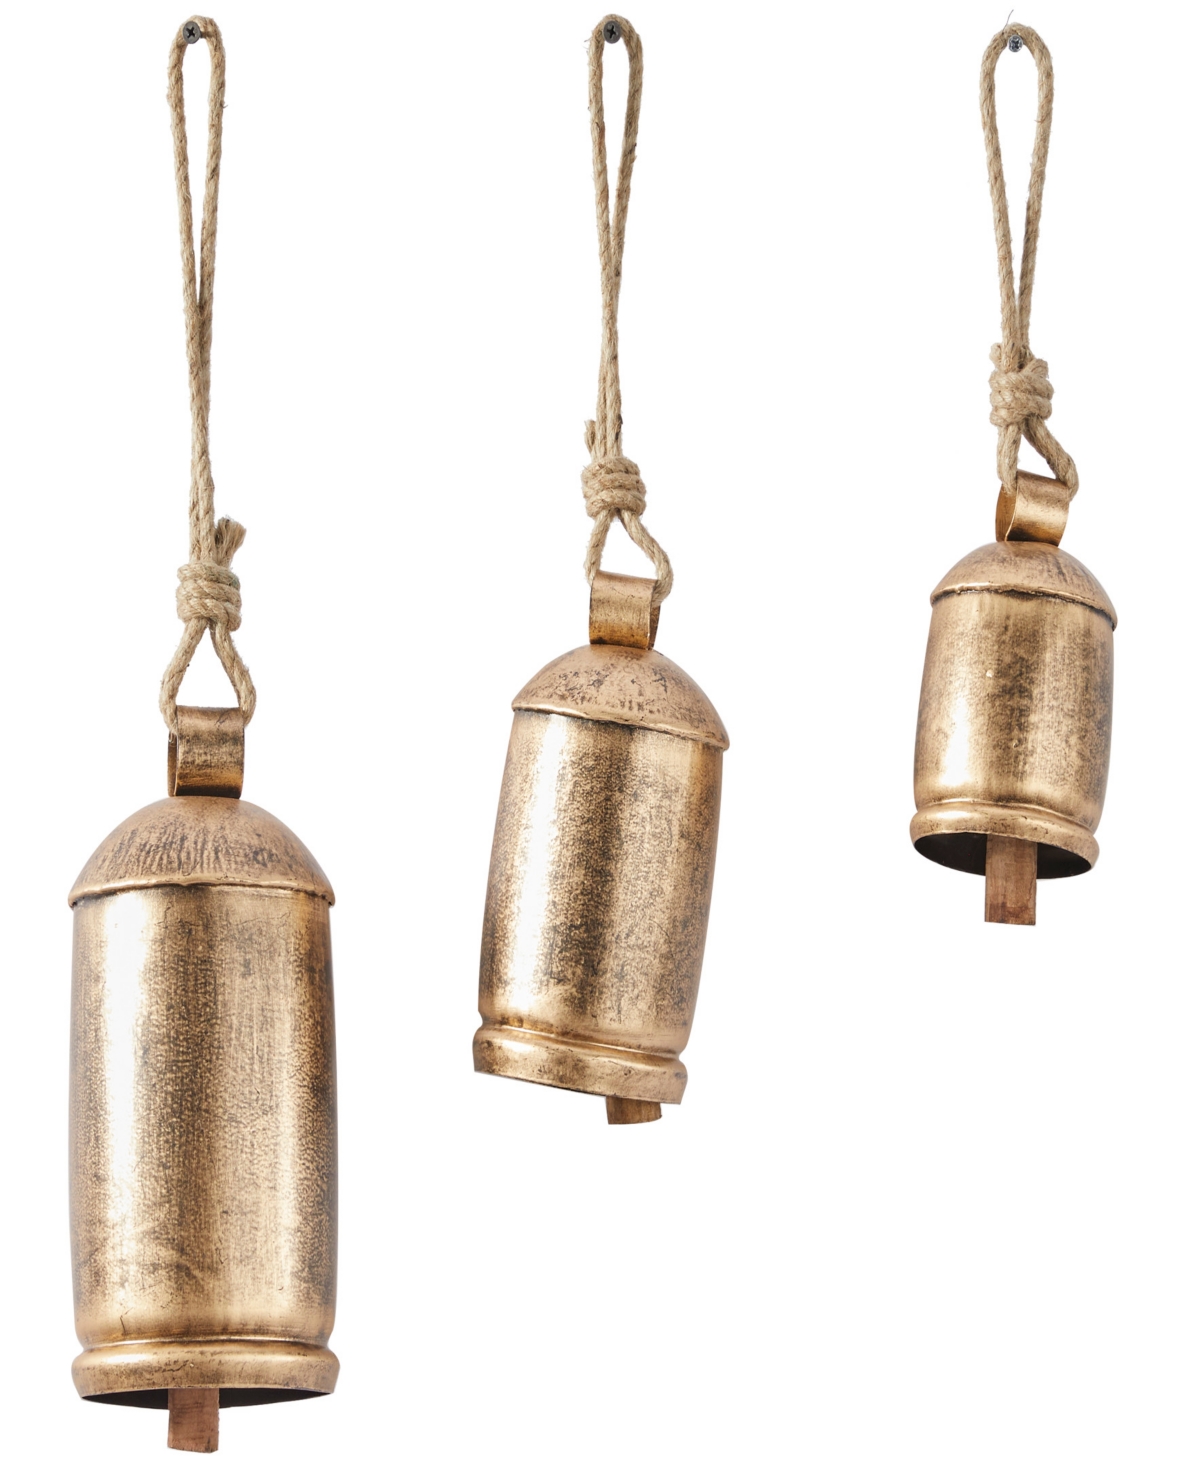 Rosemary Lane Black Metal Bohemian Decorative Cow Bell With Jute Hanging Rope Set 3 Pieces In Gold-tone